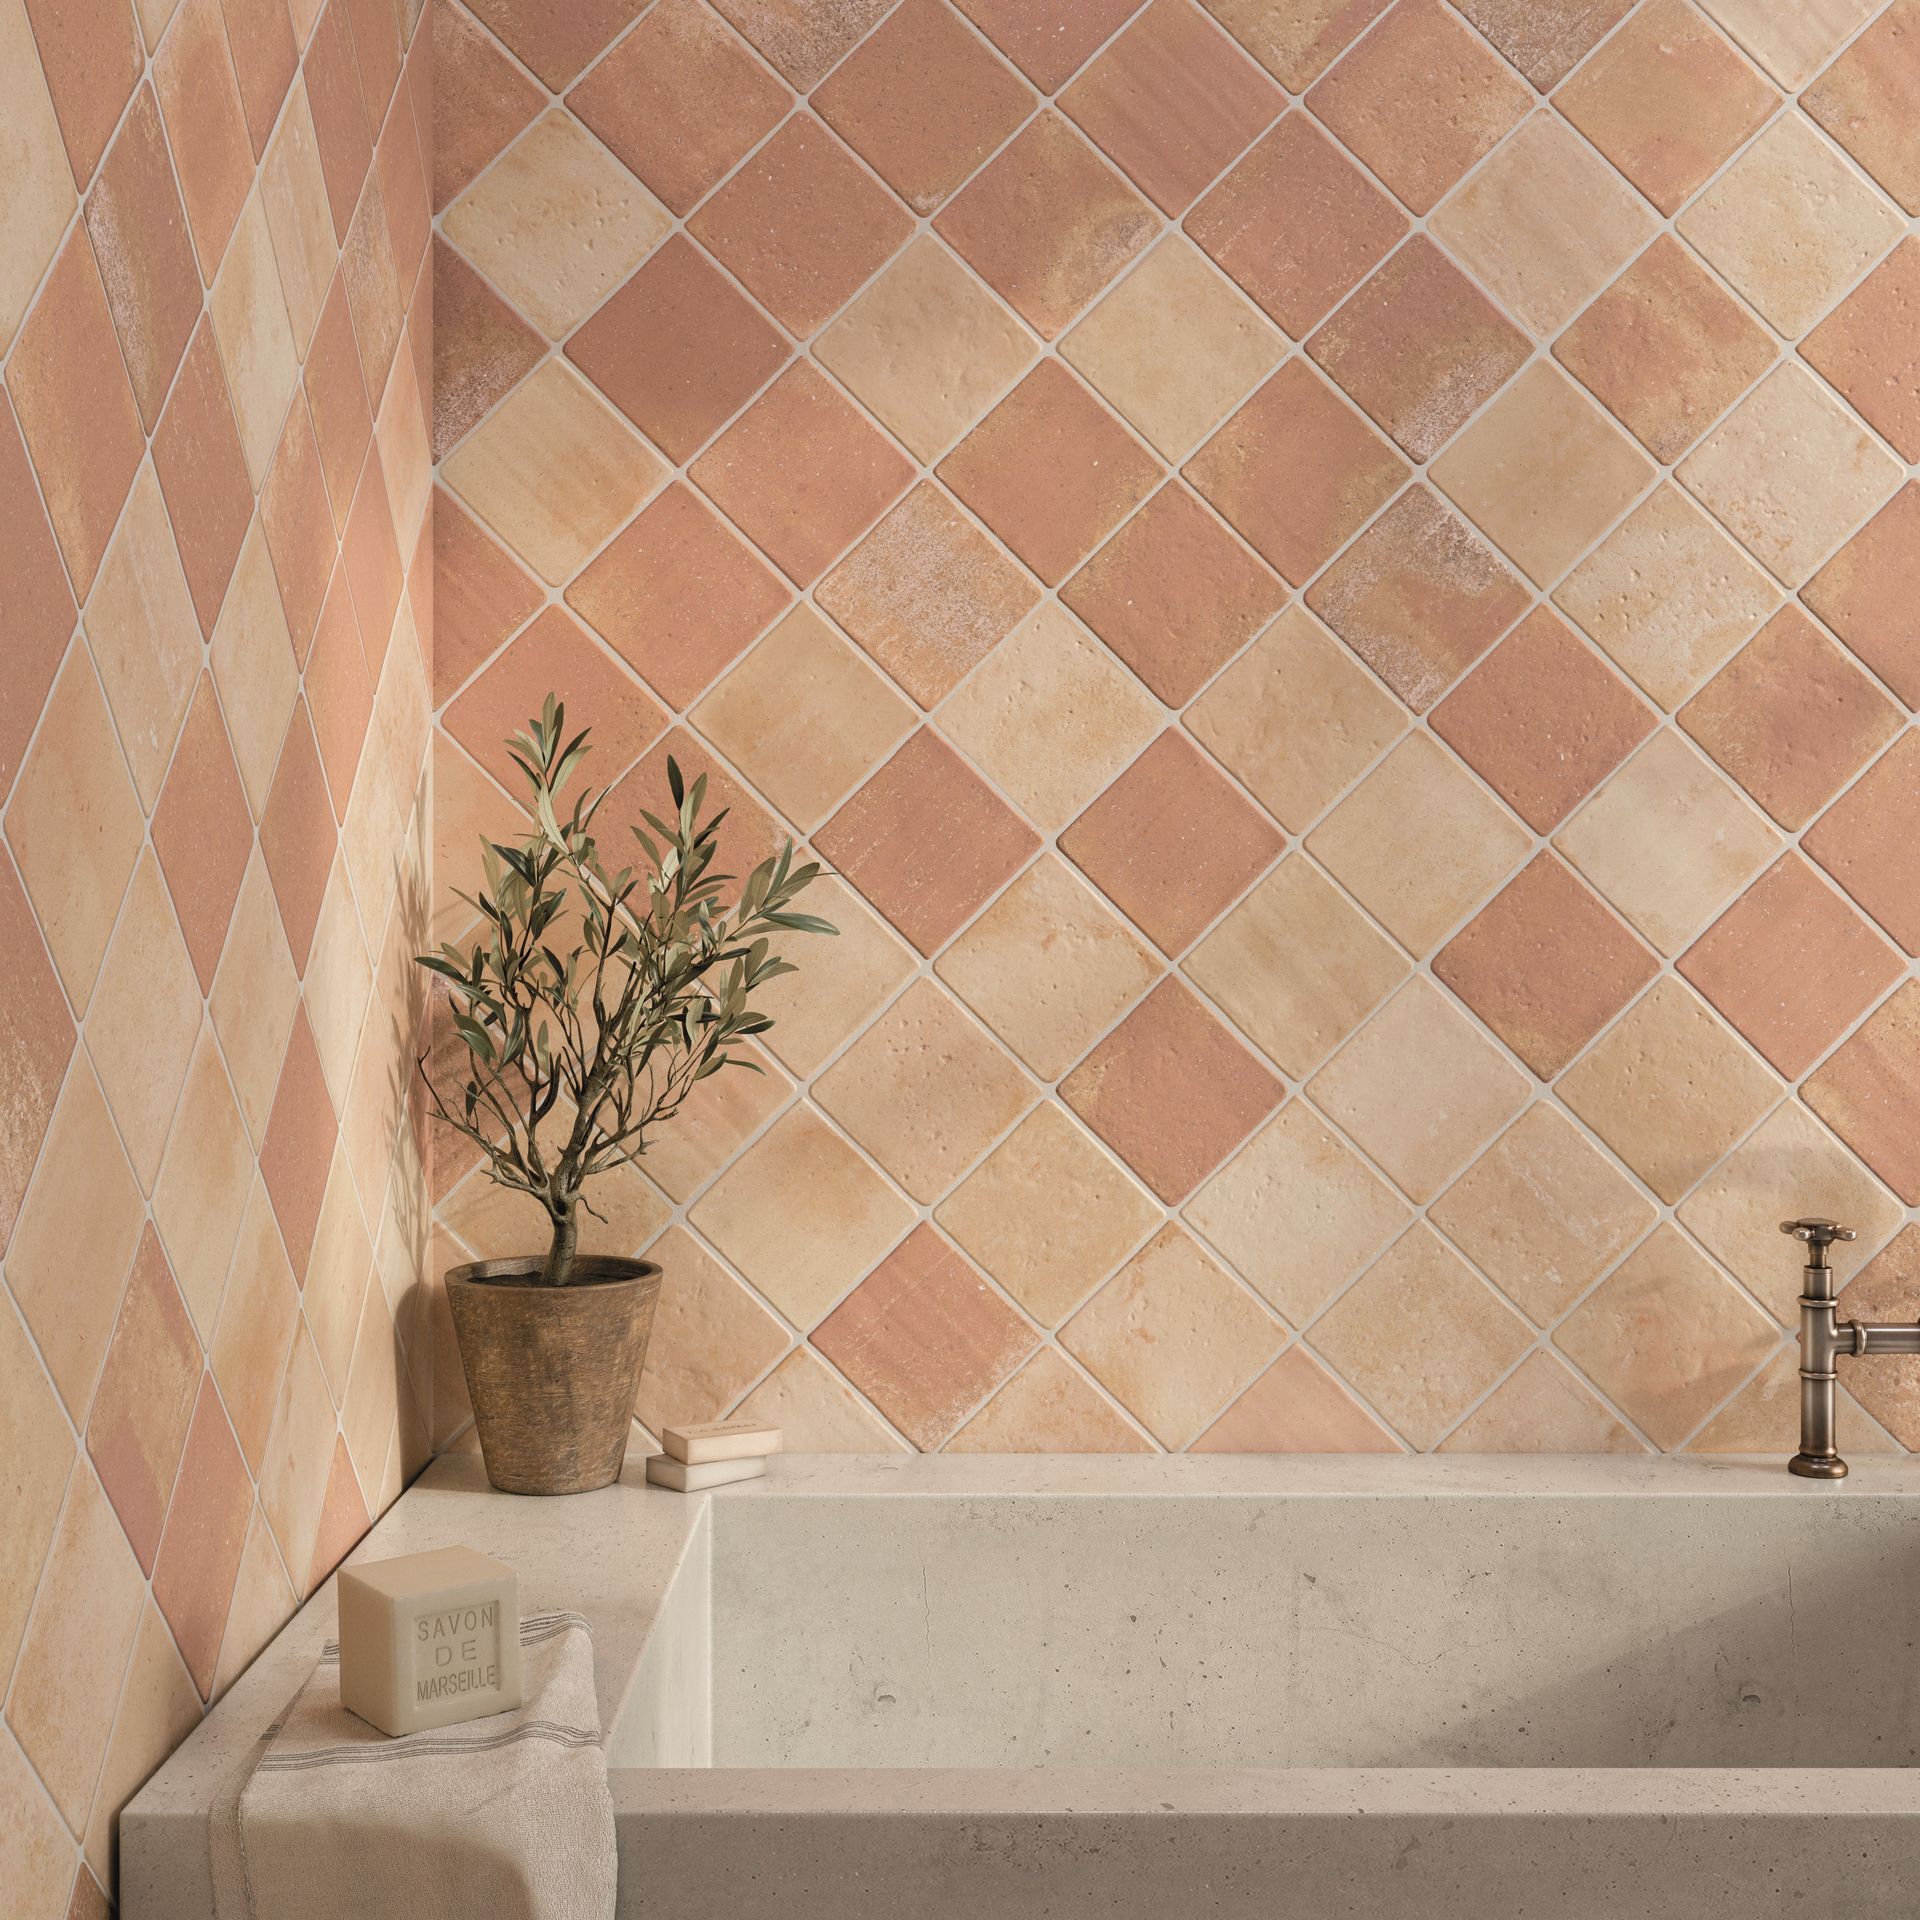 terracotta tile used in a bathroom set up with a silver like brass